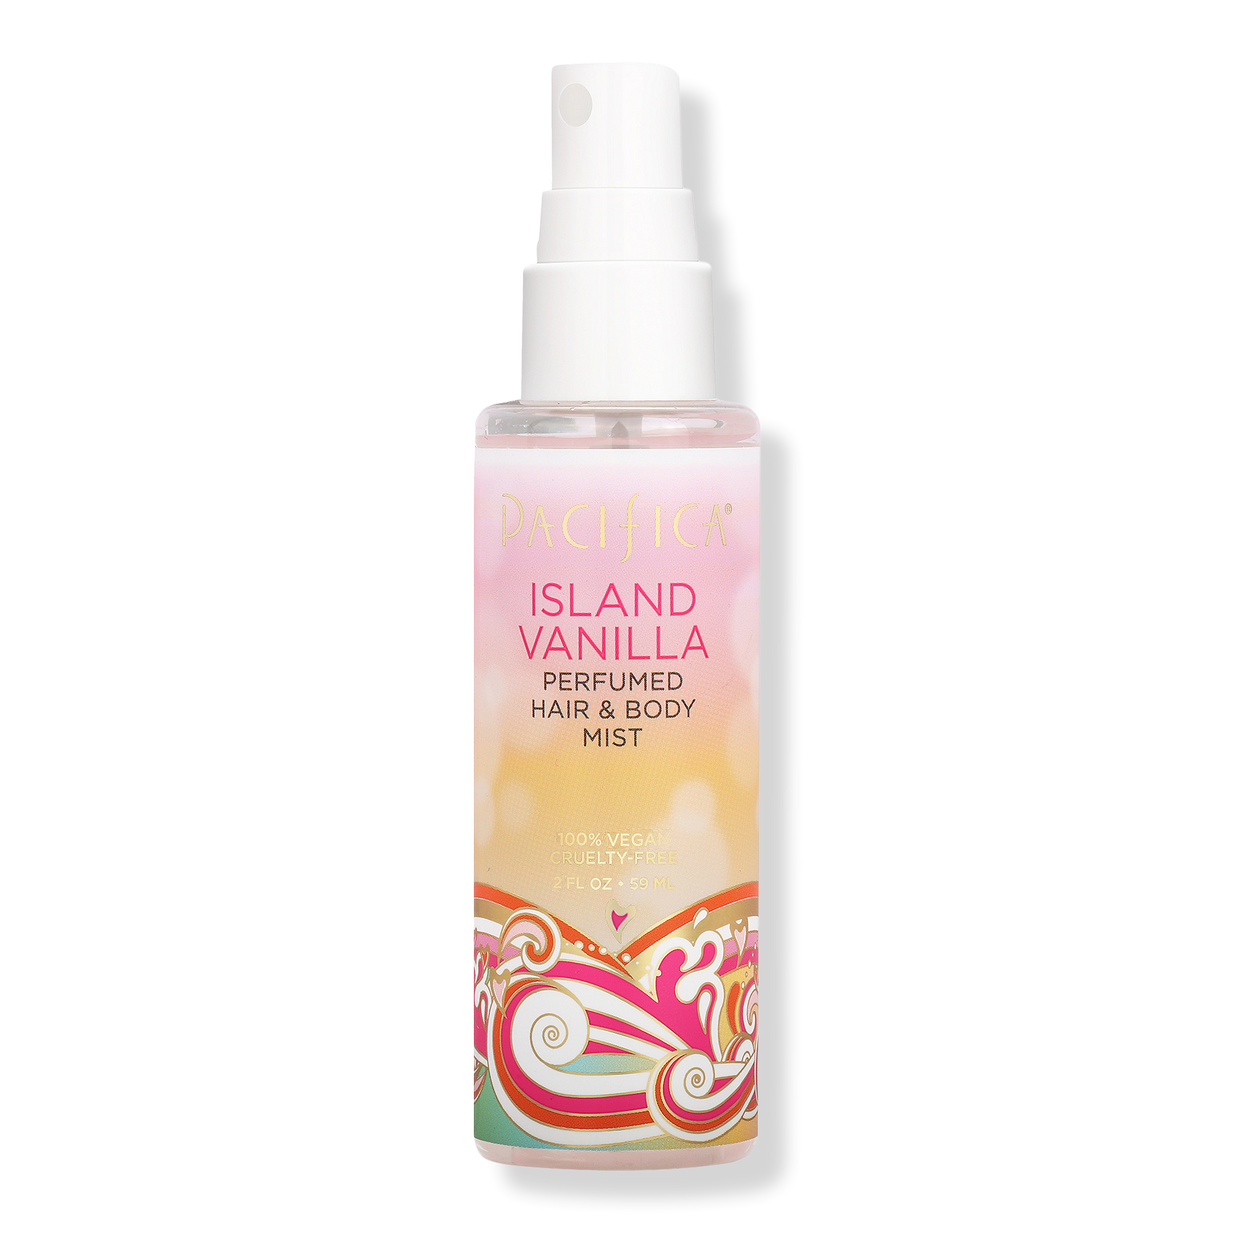  Pacifica Beauty, Island Vanilla Spray Perfume, Best Warm Vanilla  Scent, Womens Fragrance, Natural & Essential Oils, Clean Fragrance, Vegan &  Cruelty Free : Beauty & Personal Care